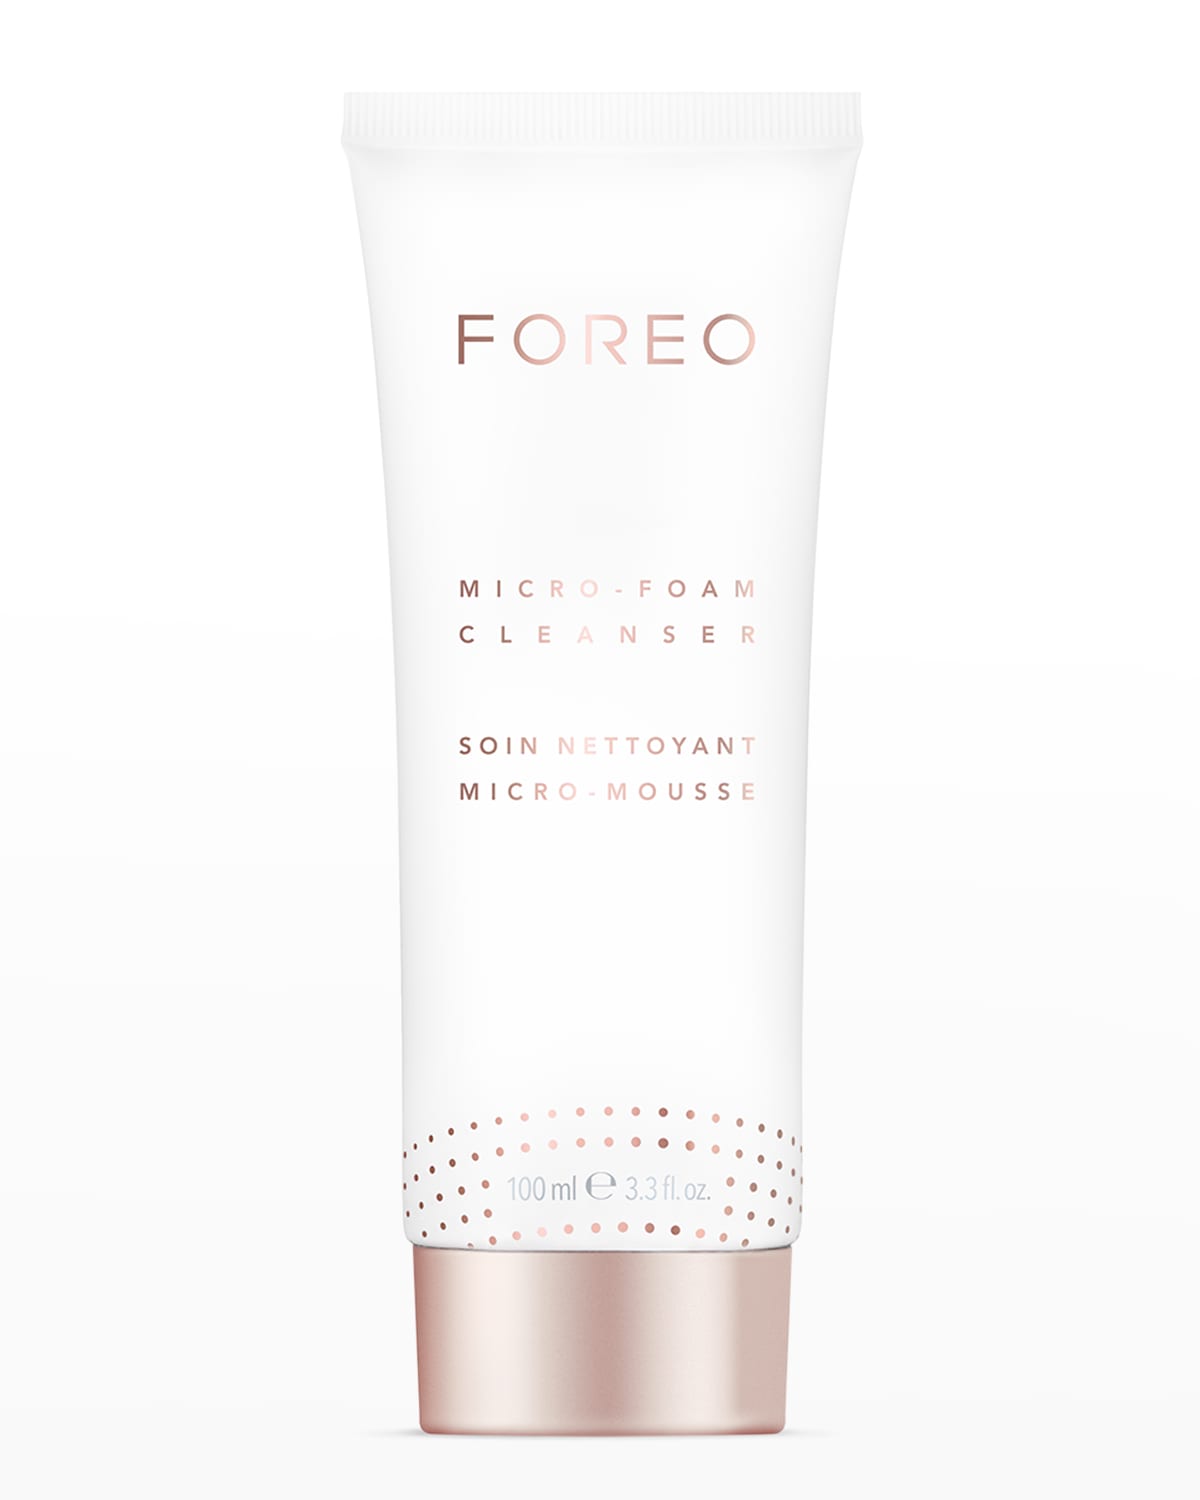 3.4 oz. Micro-Foam Cleanser, Yours with any $200 Foreo Purchase